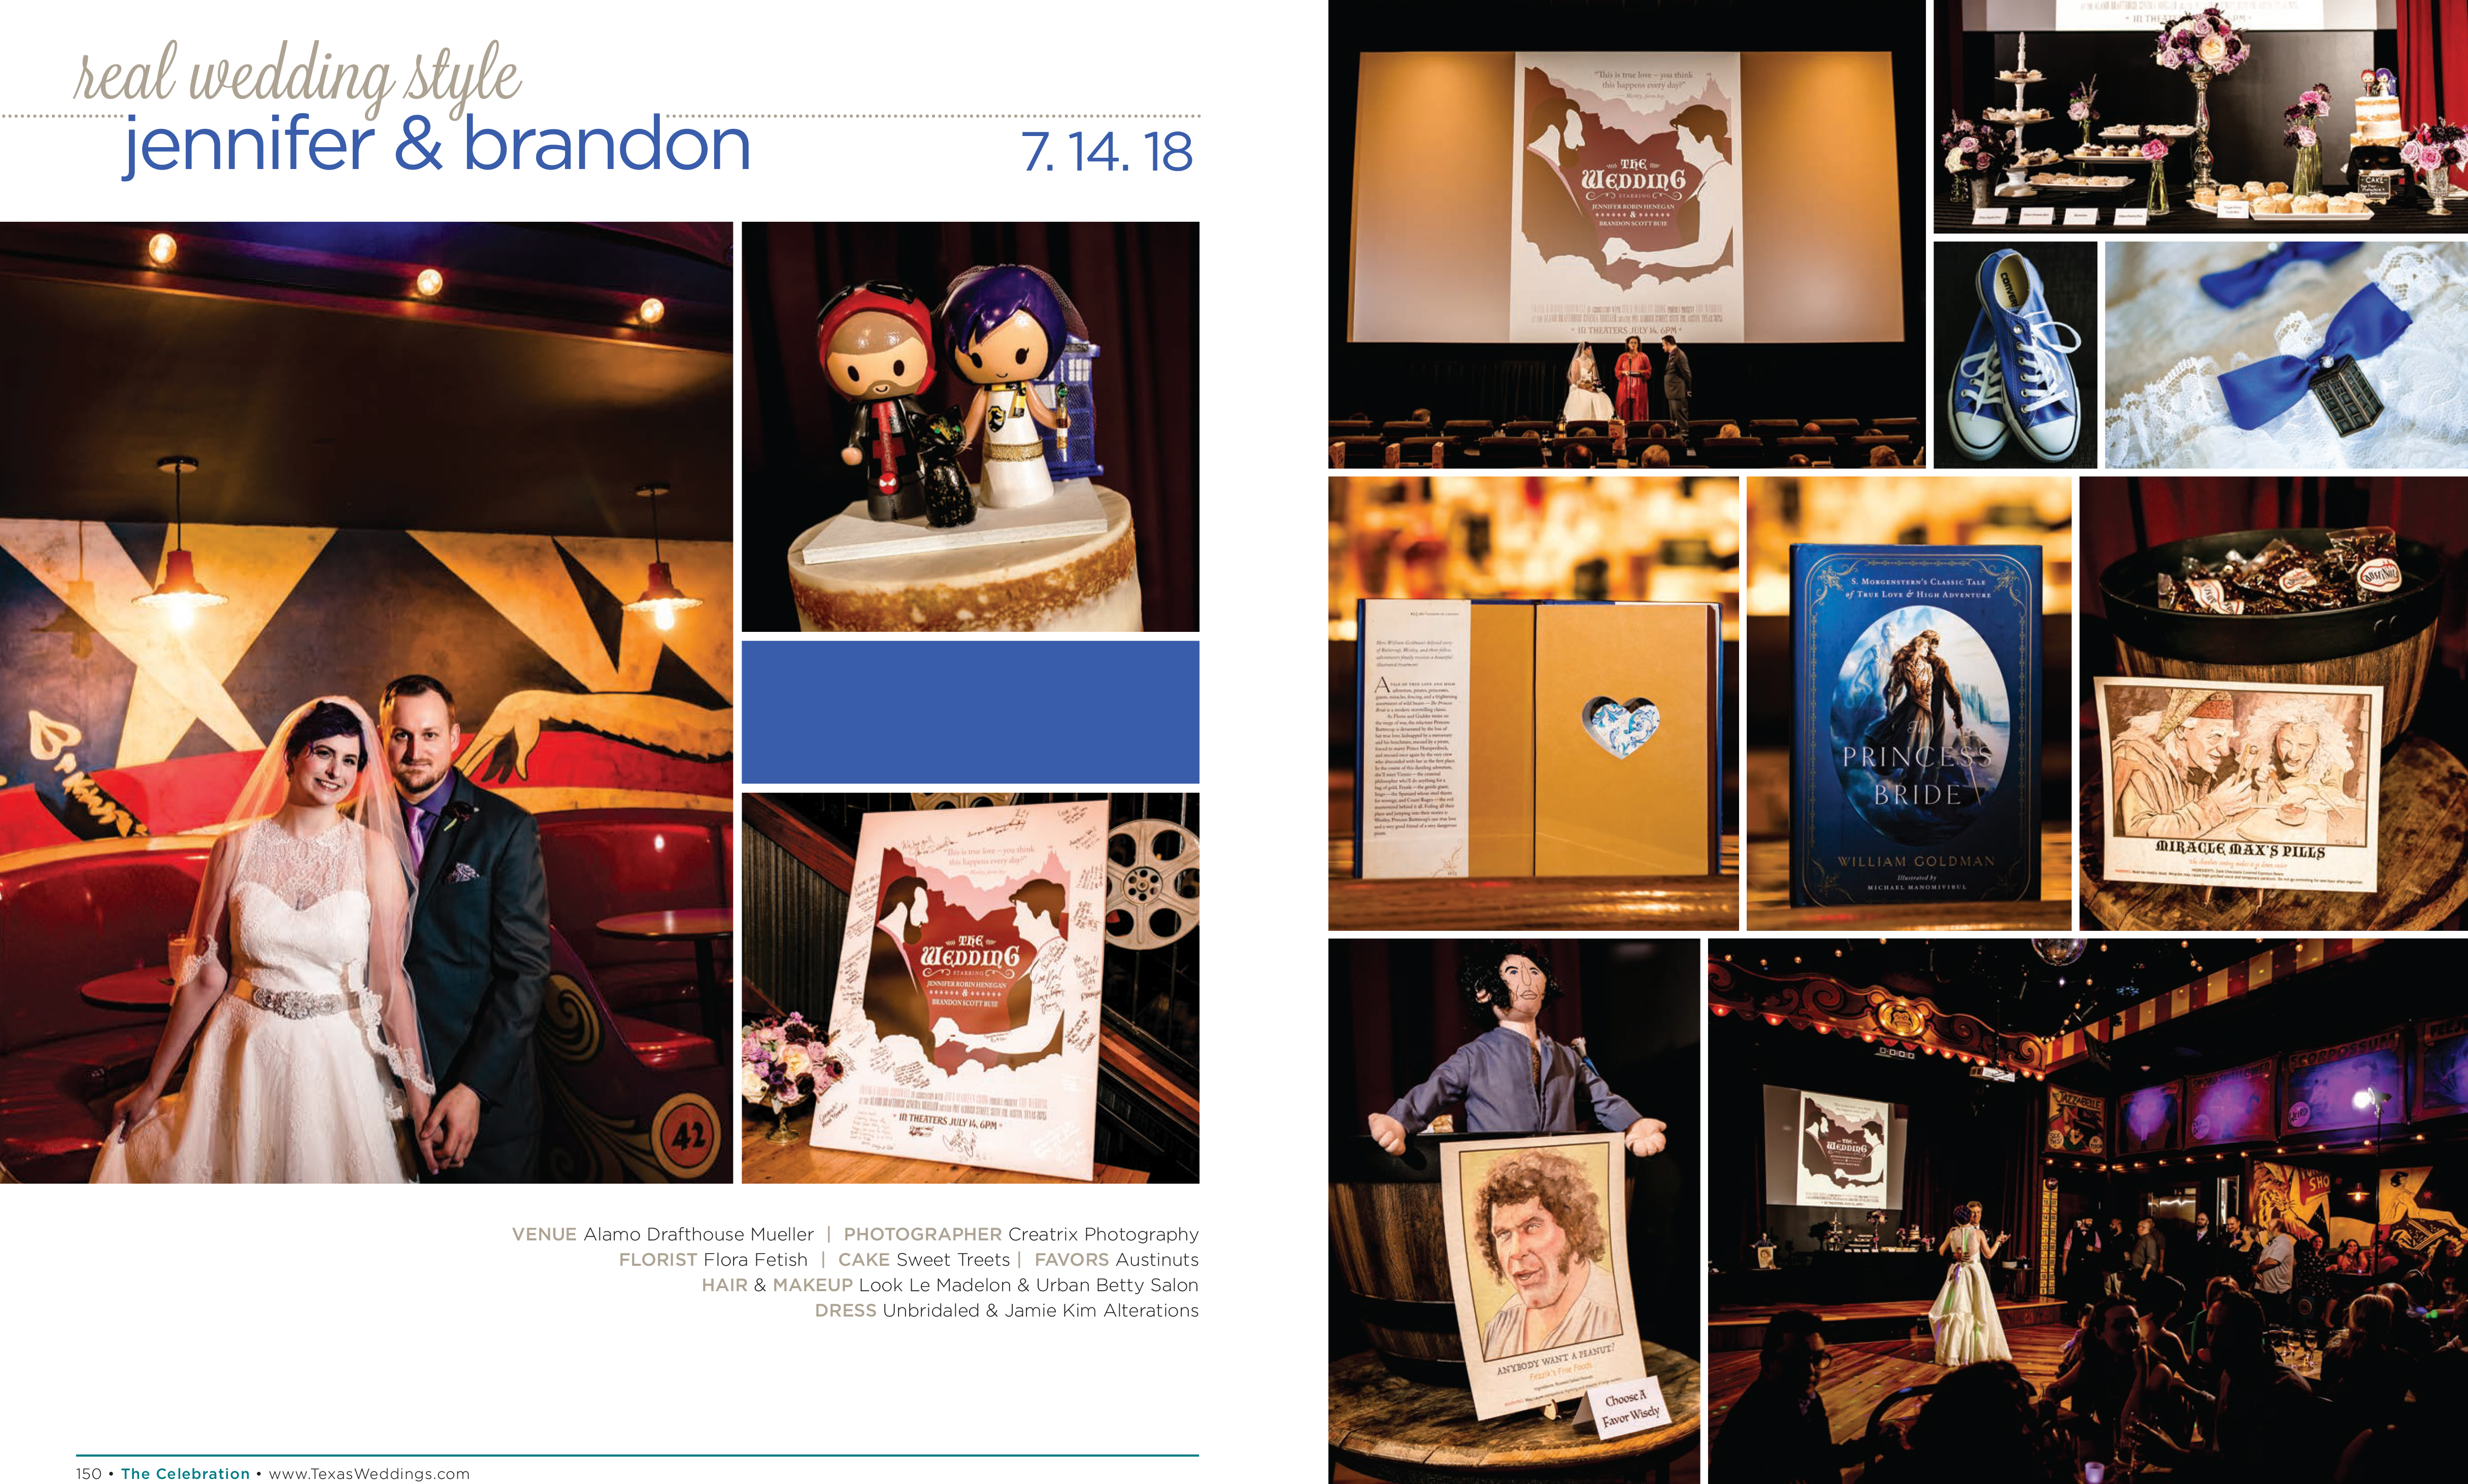 Jennifer & Brandon in their Real Wedding Page in the Spring/Summer 2019 Texas Wedding Guide